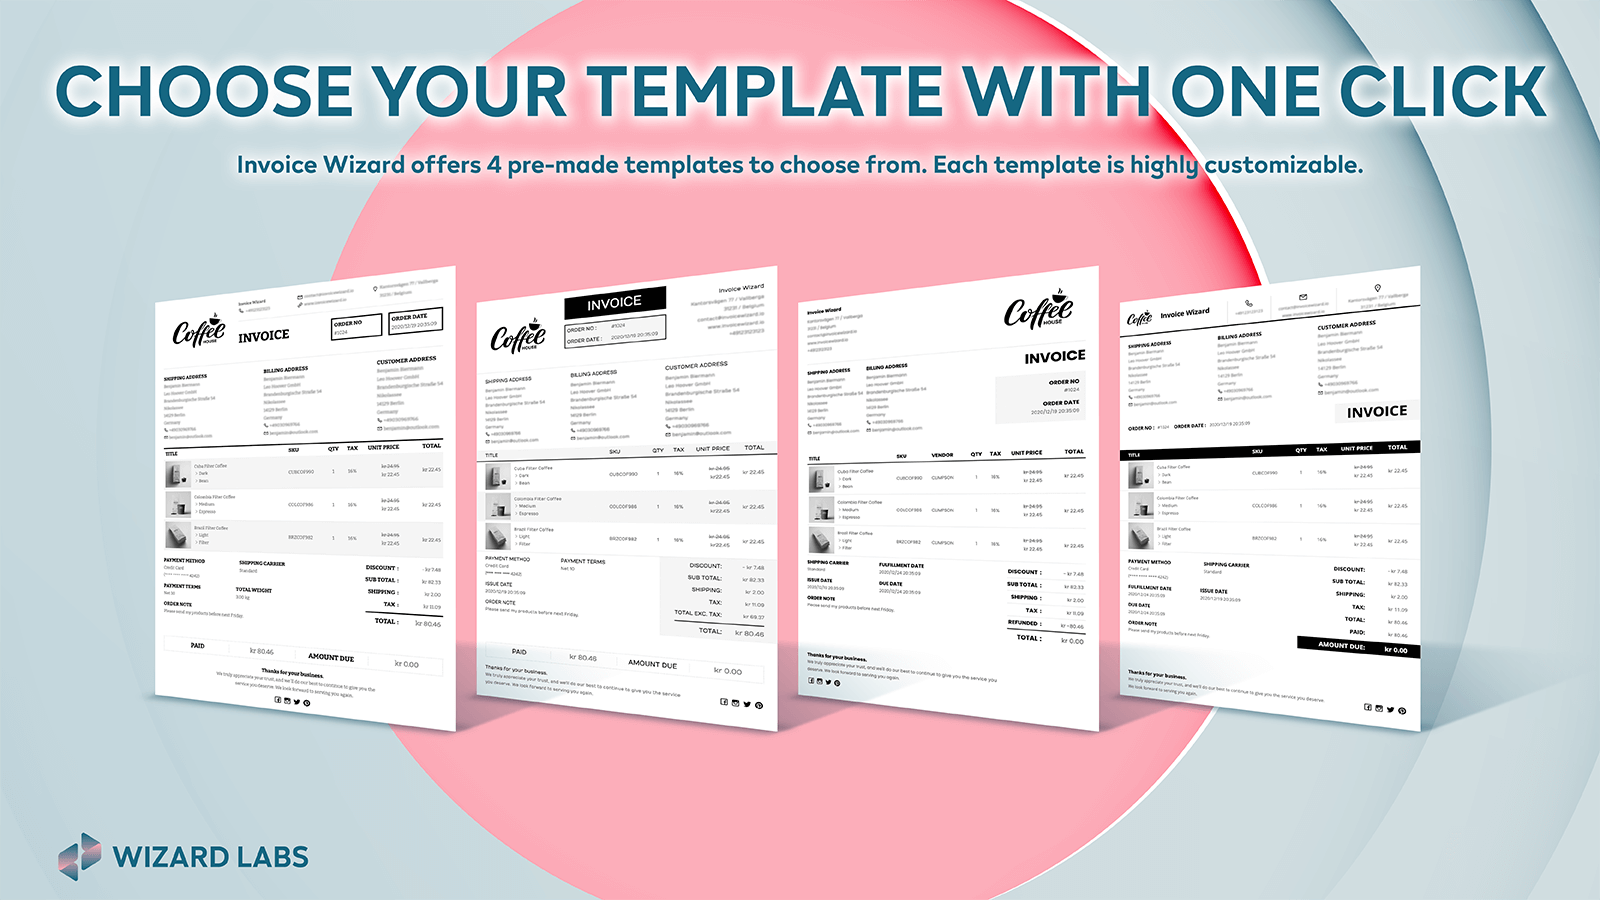 Choose your template with one click.